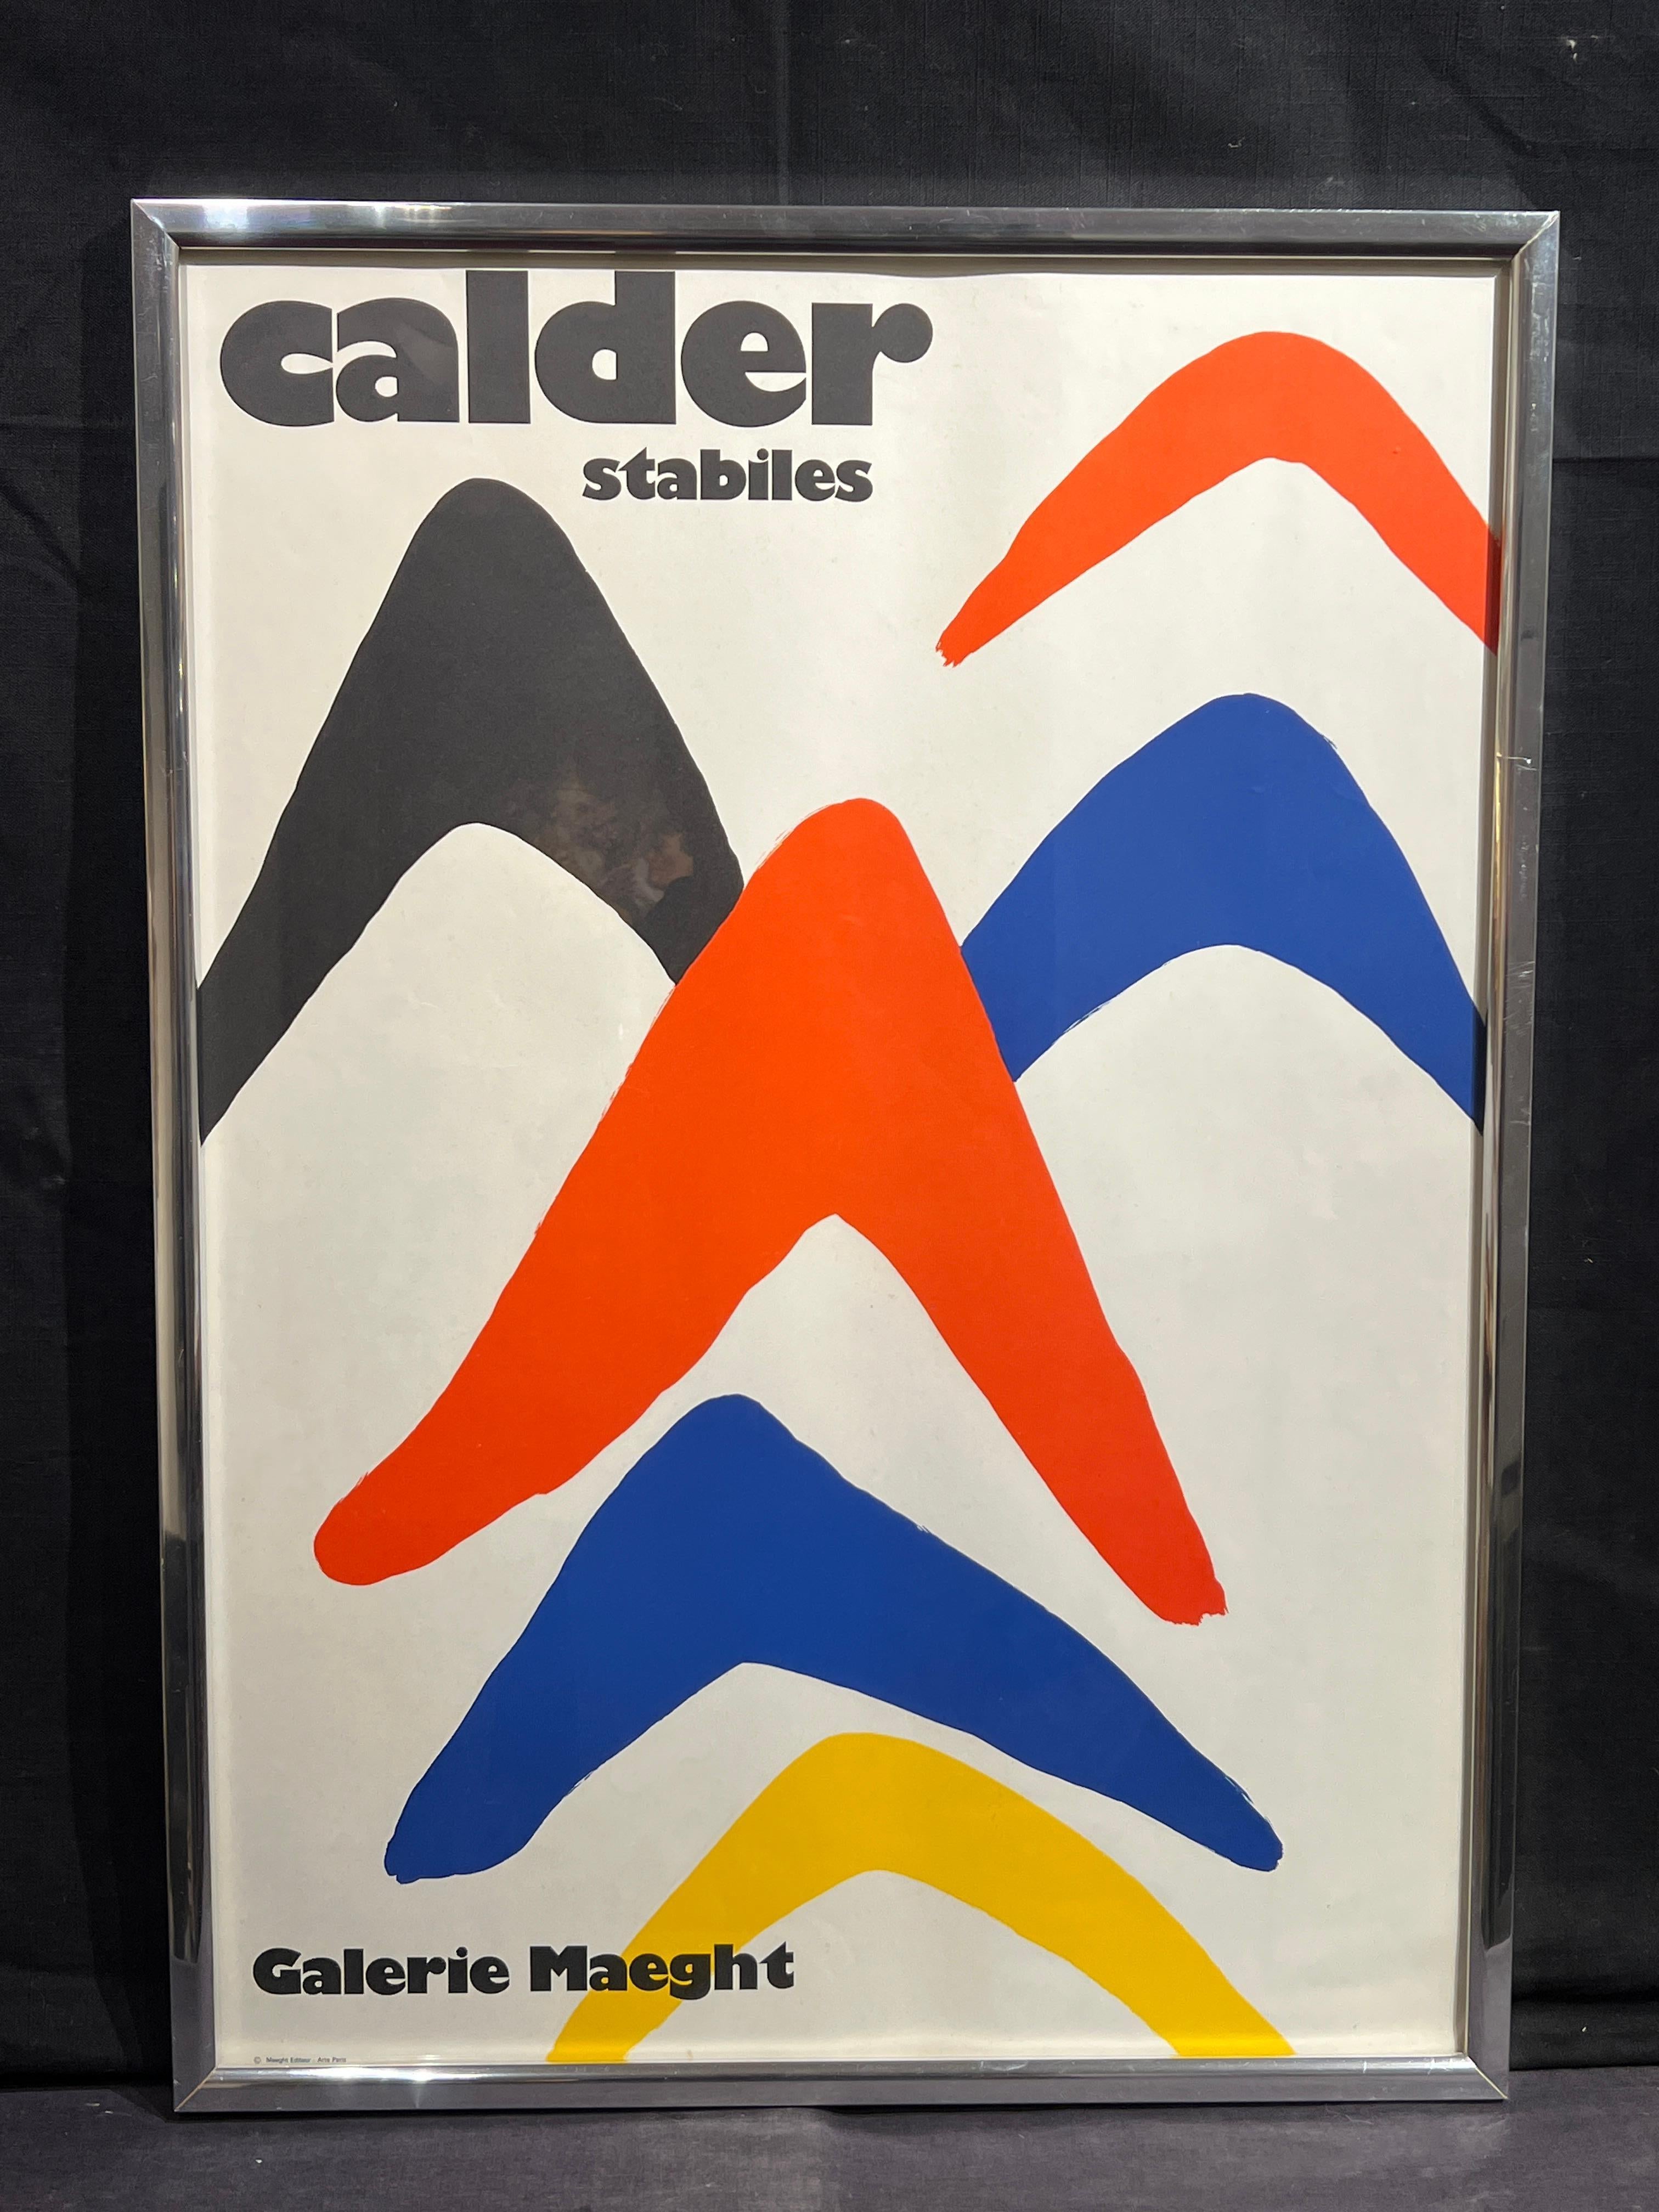 Calder Stabiles
Galerie Maeght Fine Art Poster Print
30 x 22 inches
31 x 23 inches with frame

Alexander Calder (American, 1898-1976)

One of America's best known sculptors, 